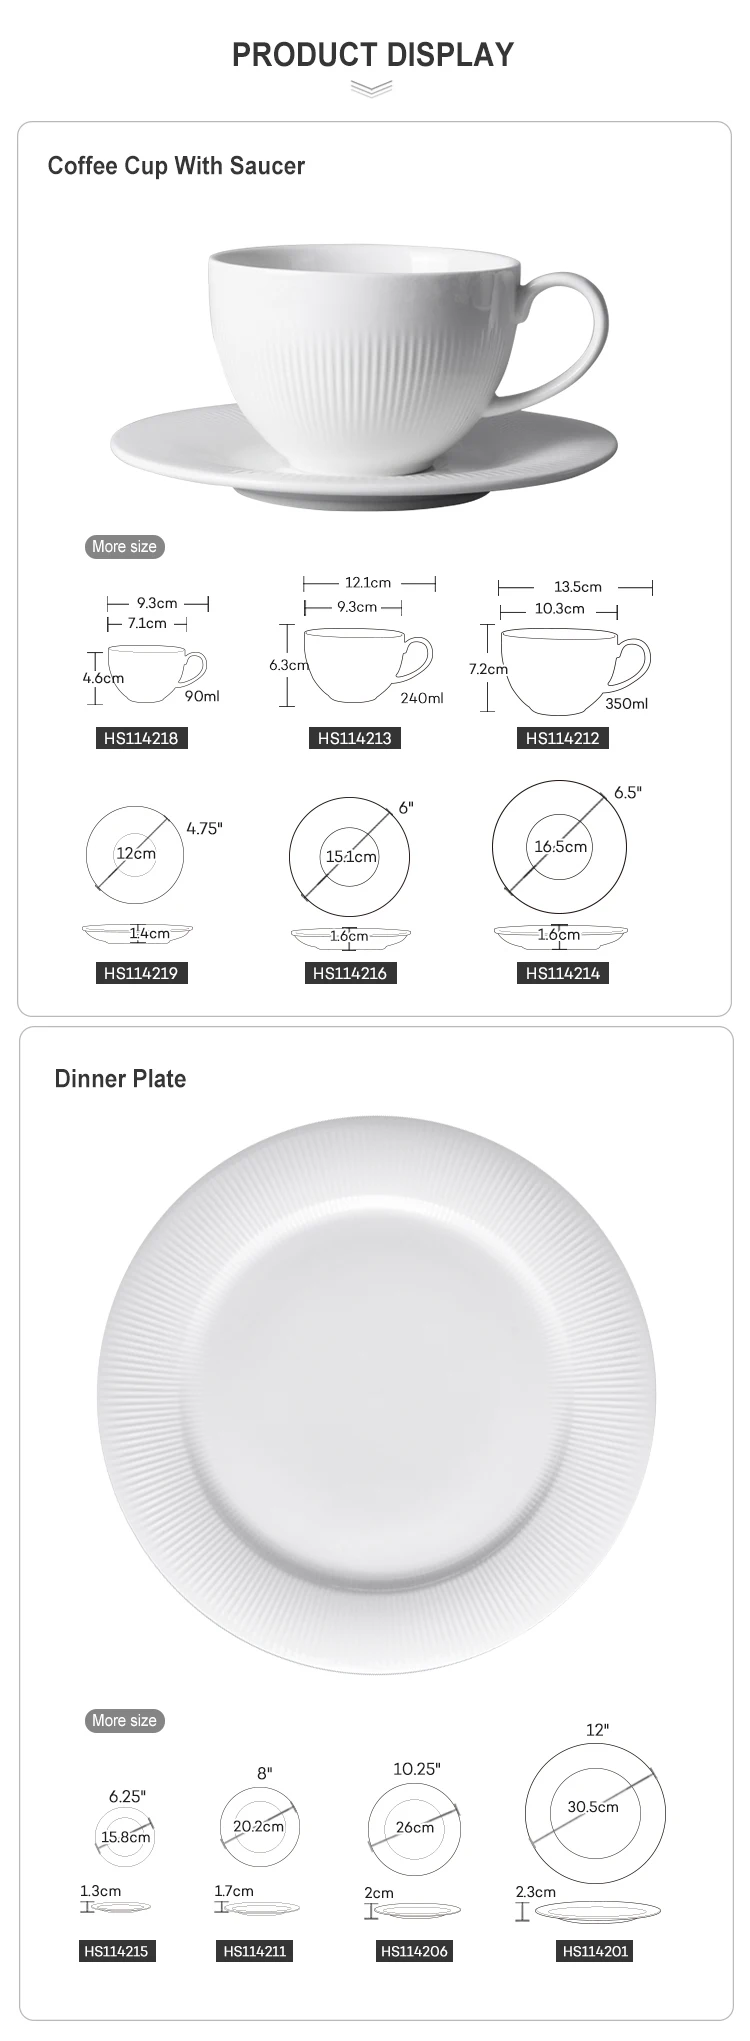 Wholesale Catering Serving Dishes Ceramic, White Porcelain Decorative Plates Wedding Charger,  Appetizer plates Tableware Set&